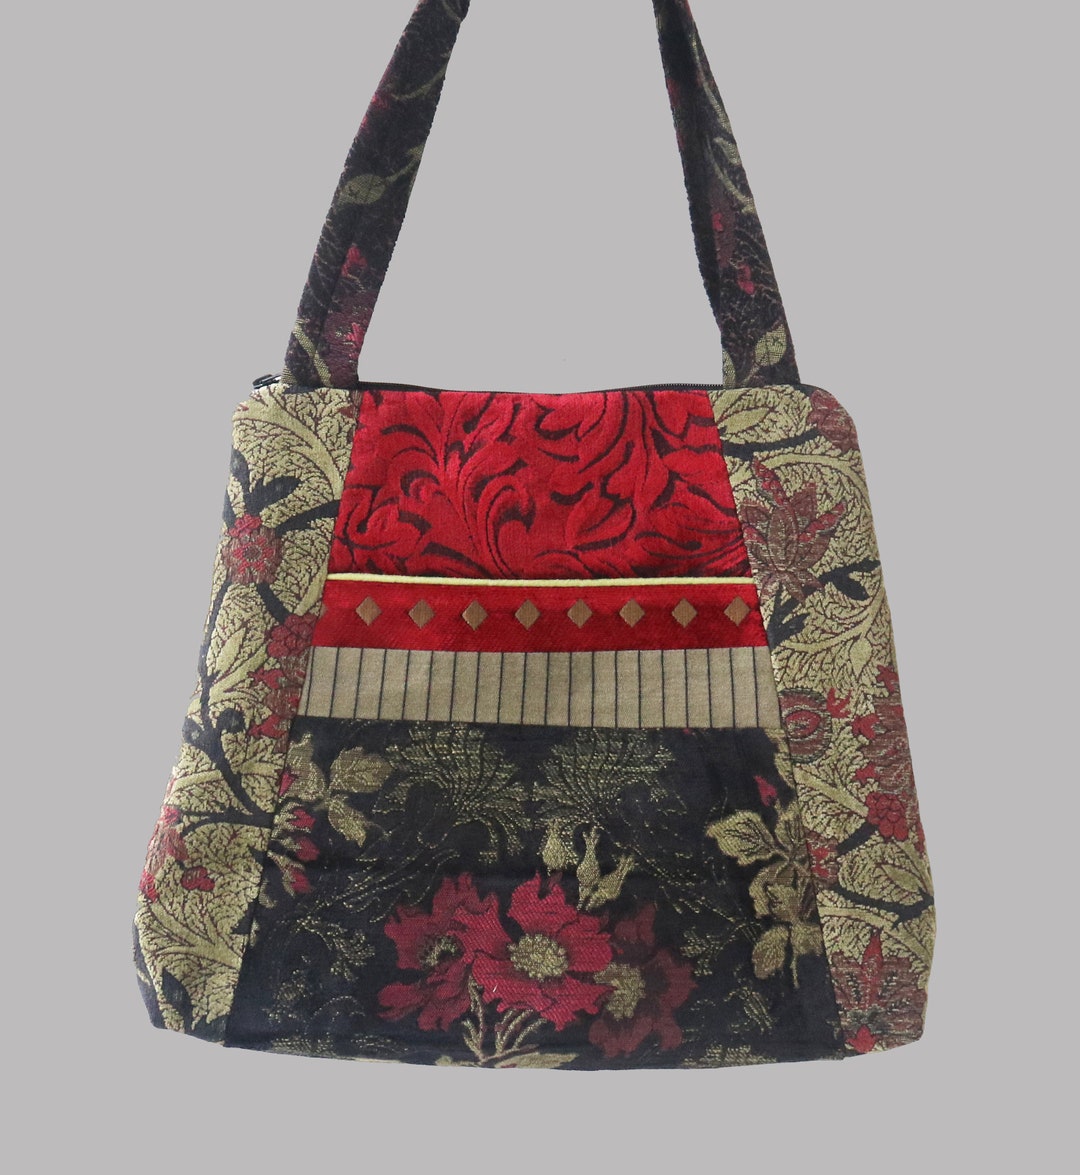 Madeira Tapestry Tote Bag in Red Black and Sage Floral - Etsy